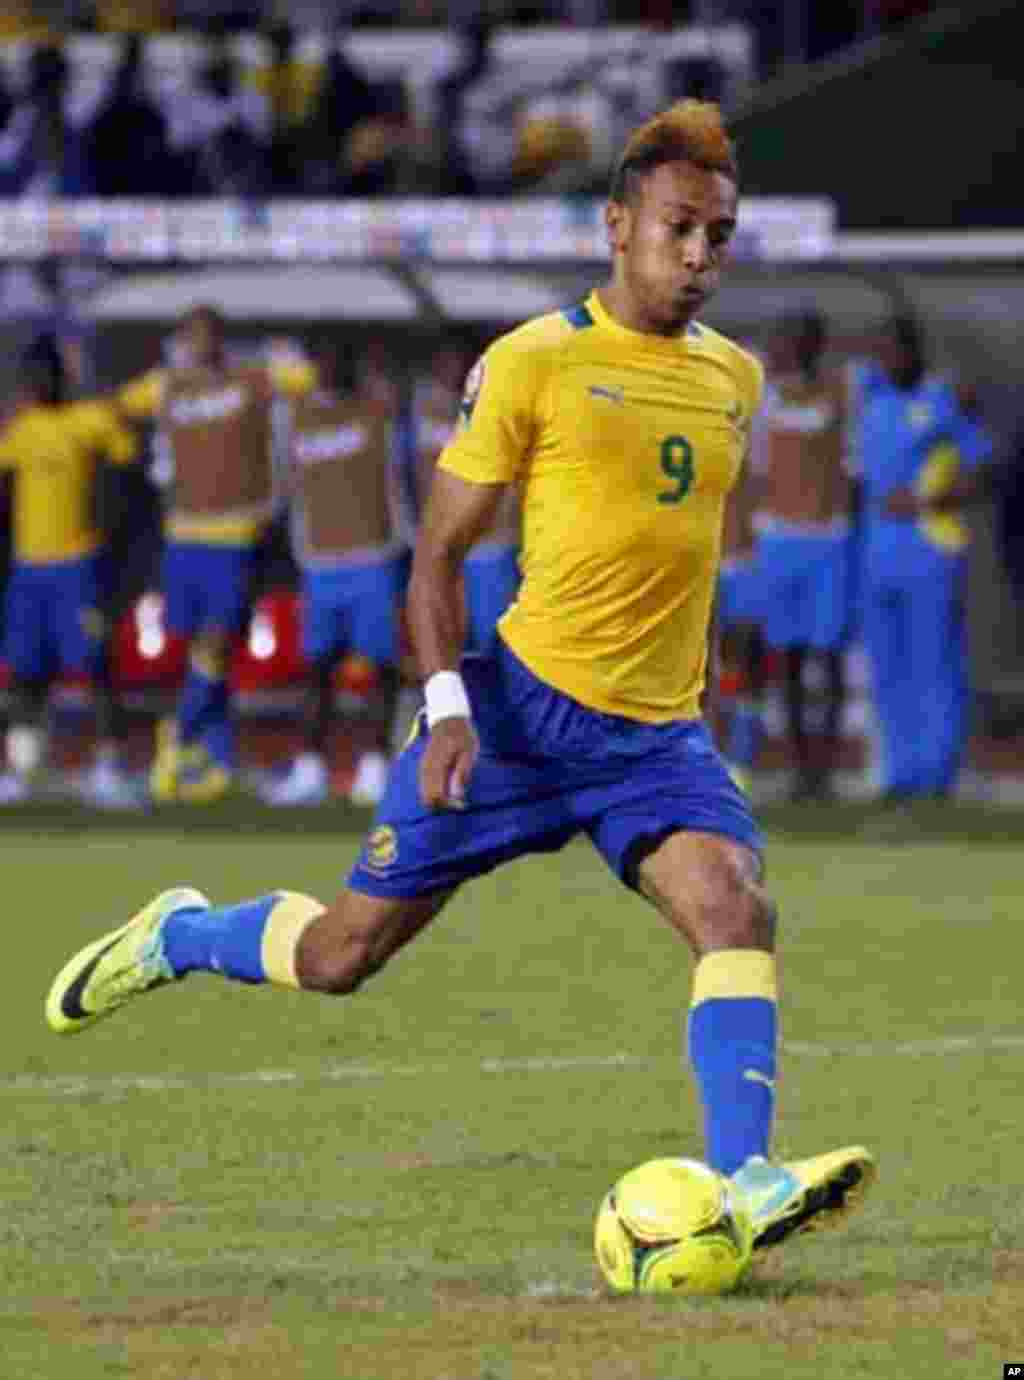 Gabon's Pierre Aubameyang takes his penalty-kick in the penalty shootout during their African Cup of Nations quarter-final soccer match against Mali at the Stade De L'Amitie Stadium in Gabon's capital Libreville, February 5, 2012.